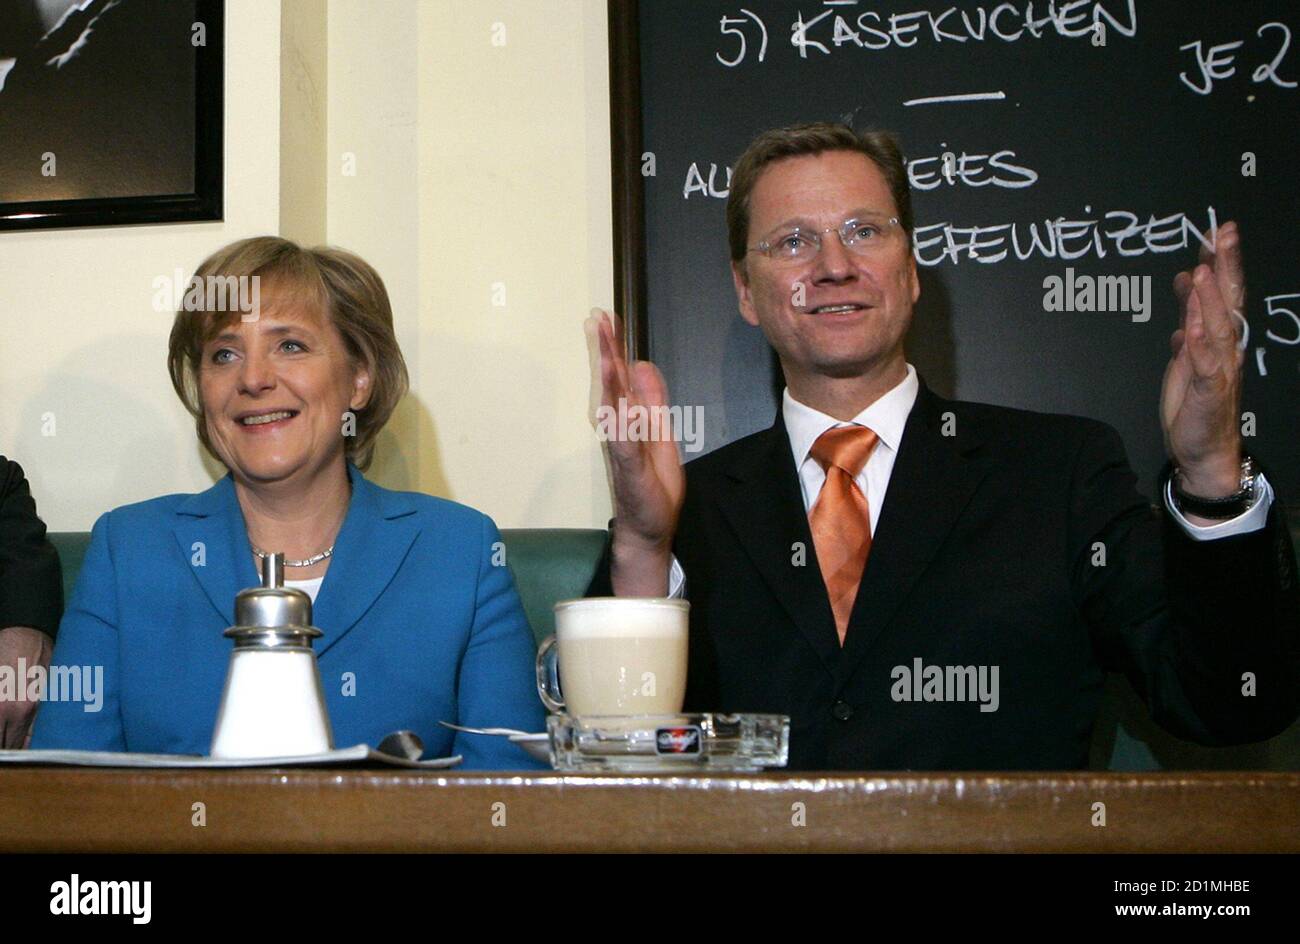 Conservative challenger Angela Merkel (L) leader of Germany's Christian Democratic Union (CDU) and Guido Westerwelle, leader of the German liberal Free Democratic Party (FDP) pose for photographers in a restaurant in the western German city of Bonn September 17, 2005. German Chancellor Gerhard Schroeder and his rival Angela Merkel launched a final drive on election eve on Saturday to win over up to 10 million undecided voters - estimated to be the highest total ever. REUTERS/Ina Fassbender  INA/AA Stock Photo